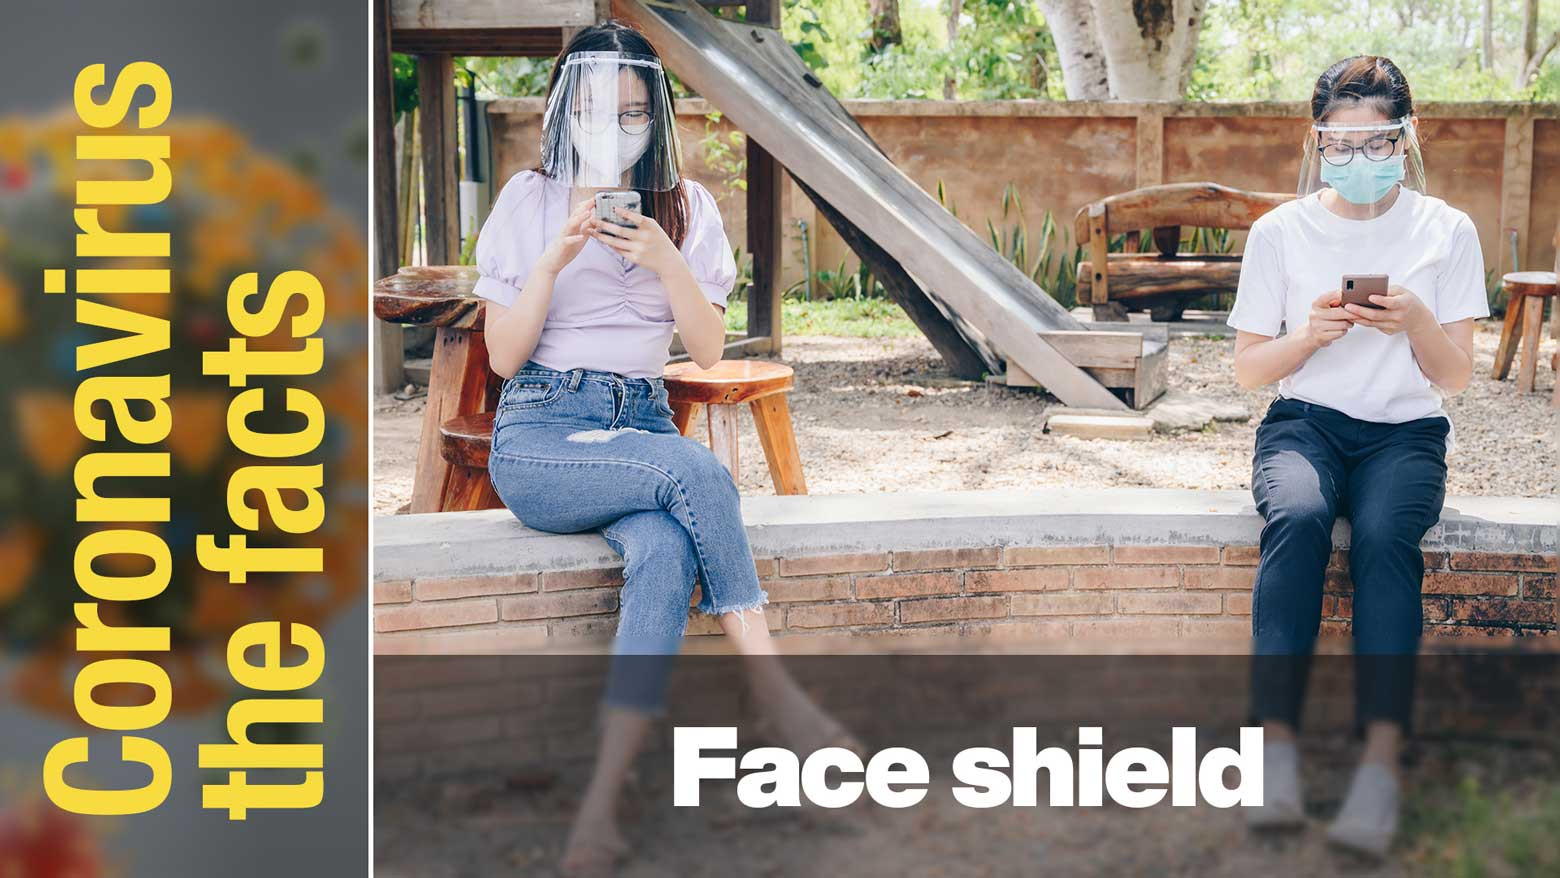 Can face shields replace masks?